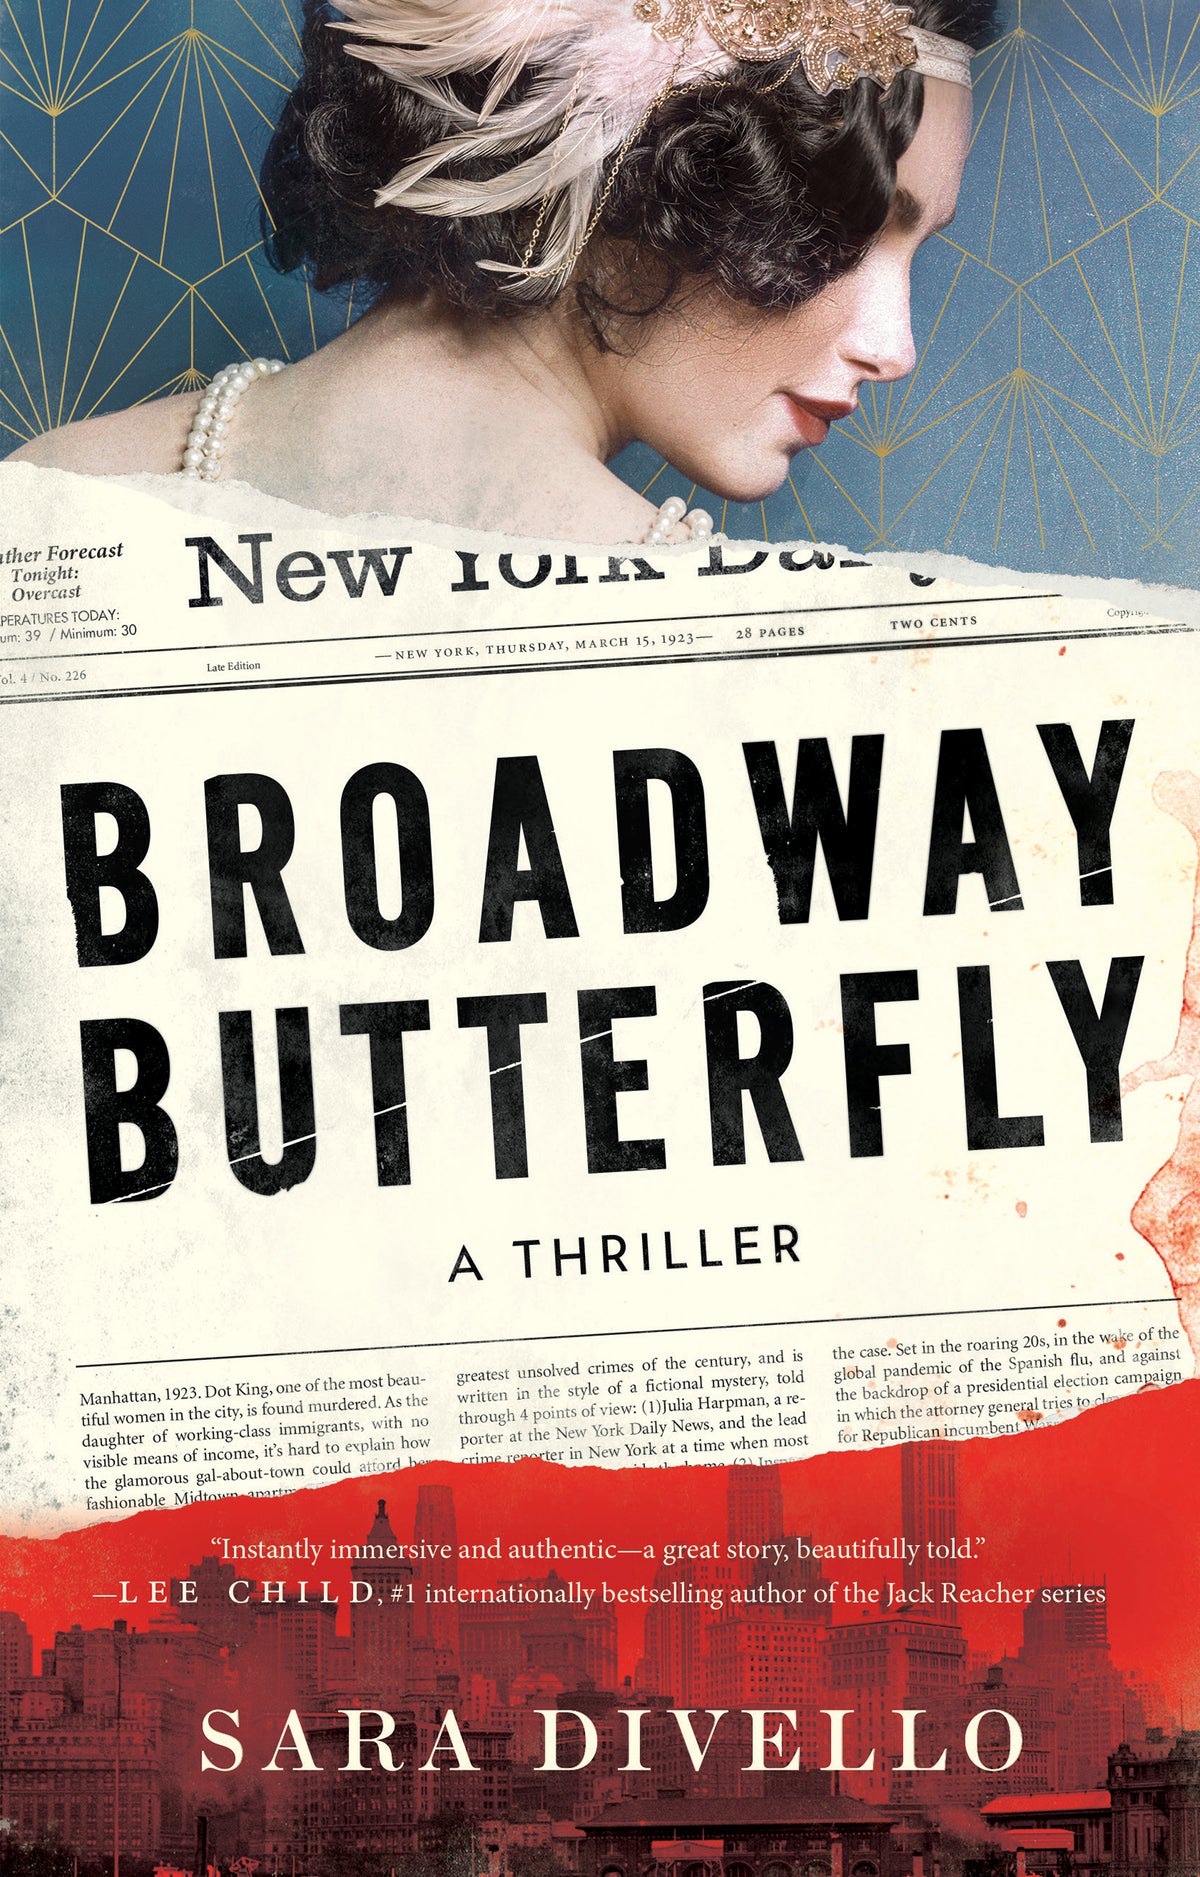 Book Review: True crime meets history in Sara DiVello's 1920s murder mystery 'Broadway Butterfly'